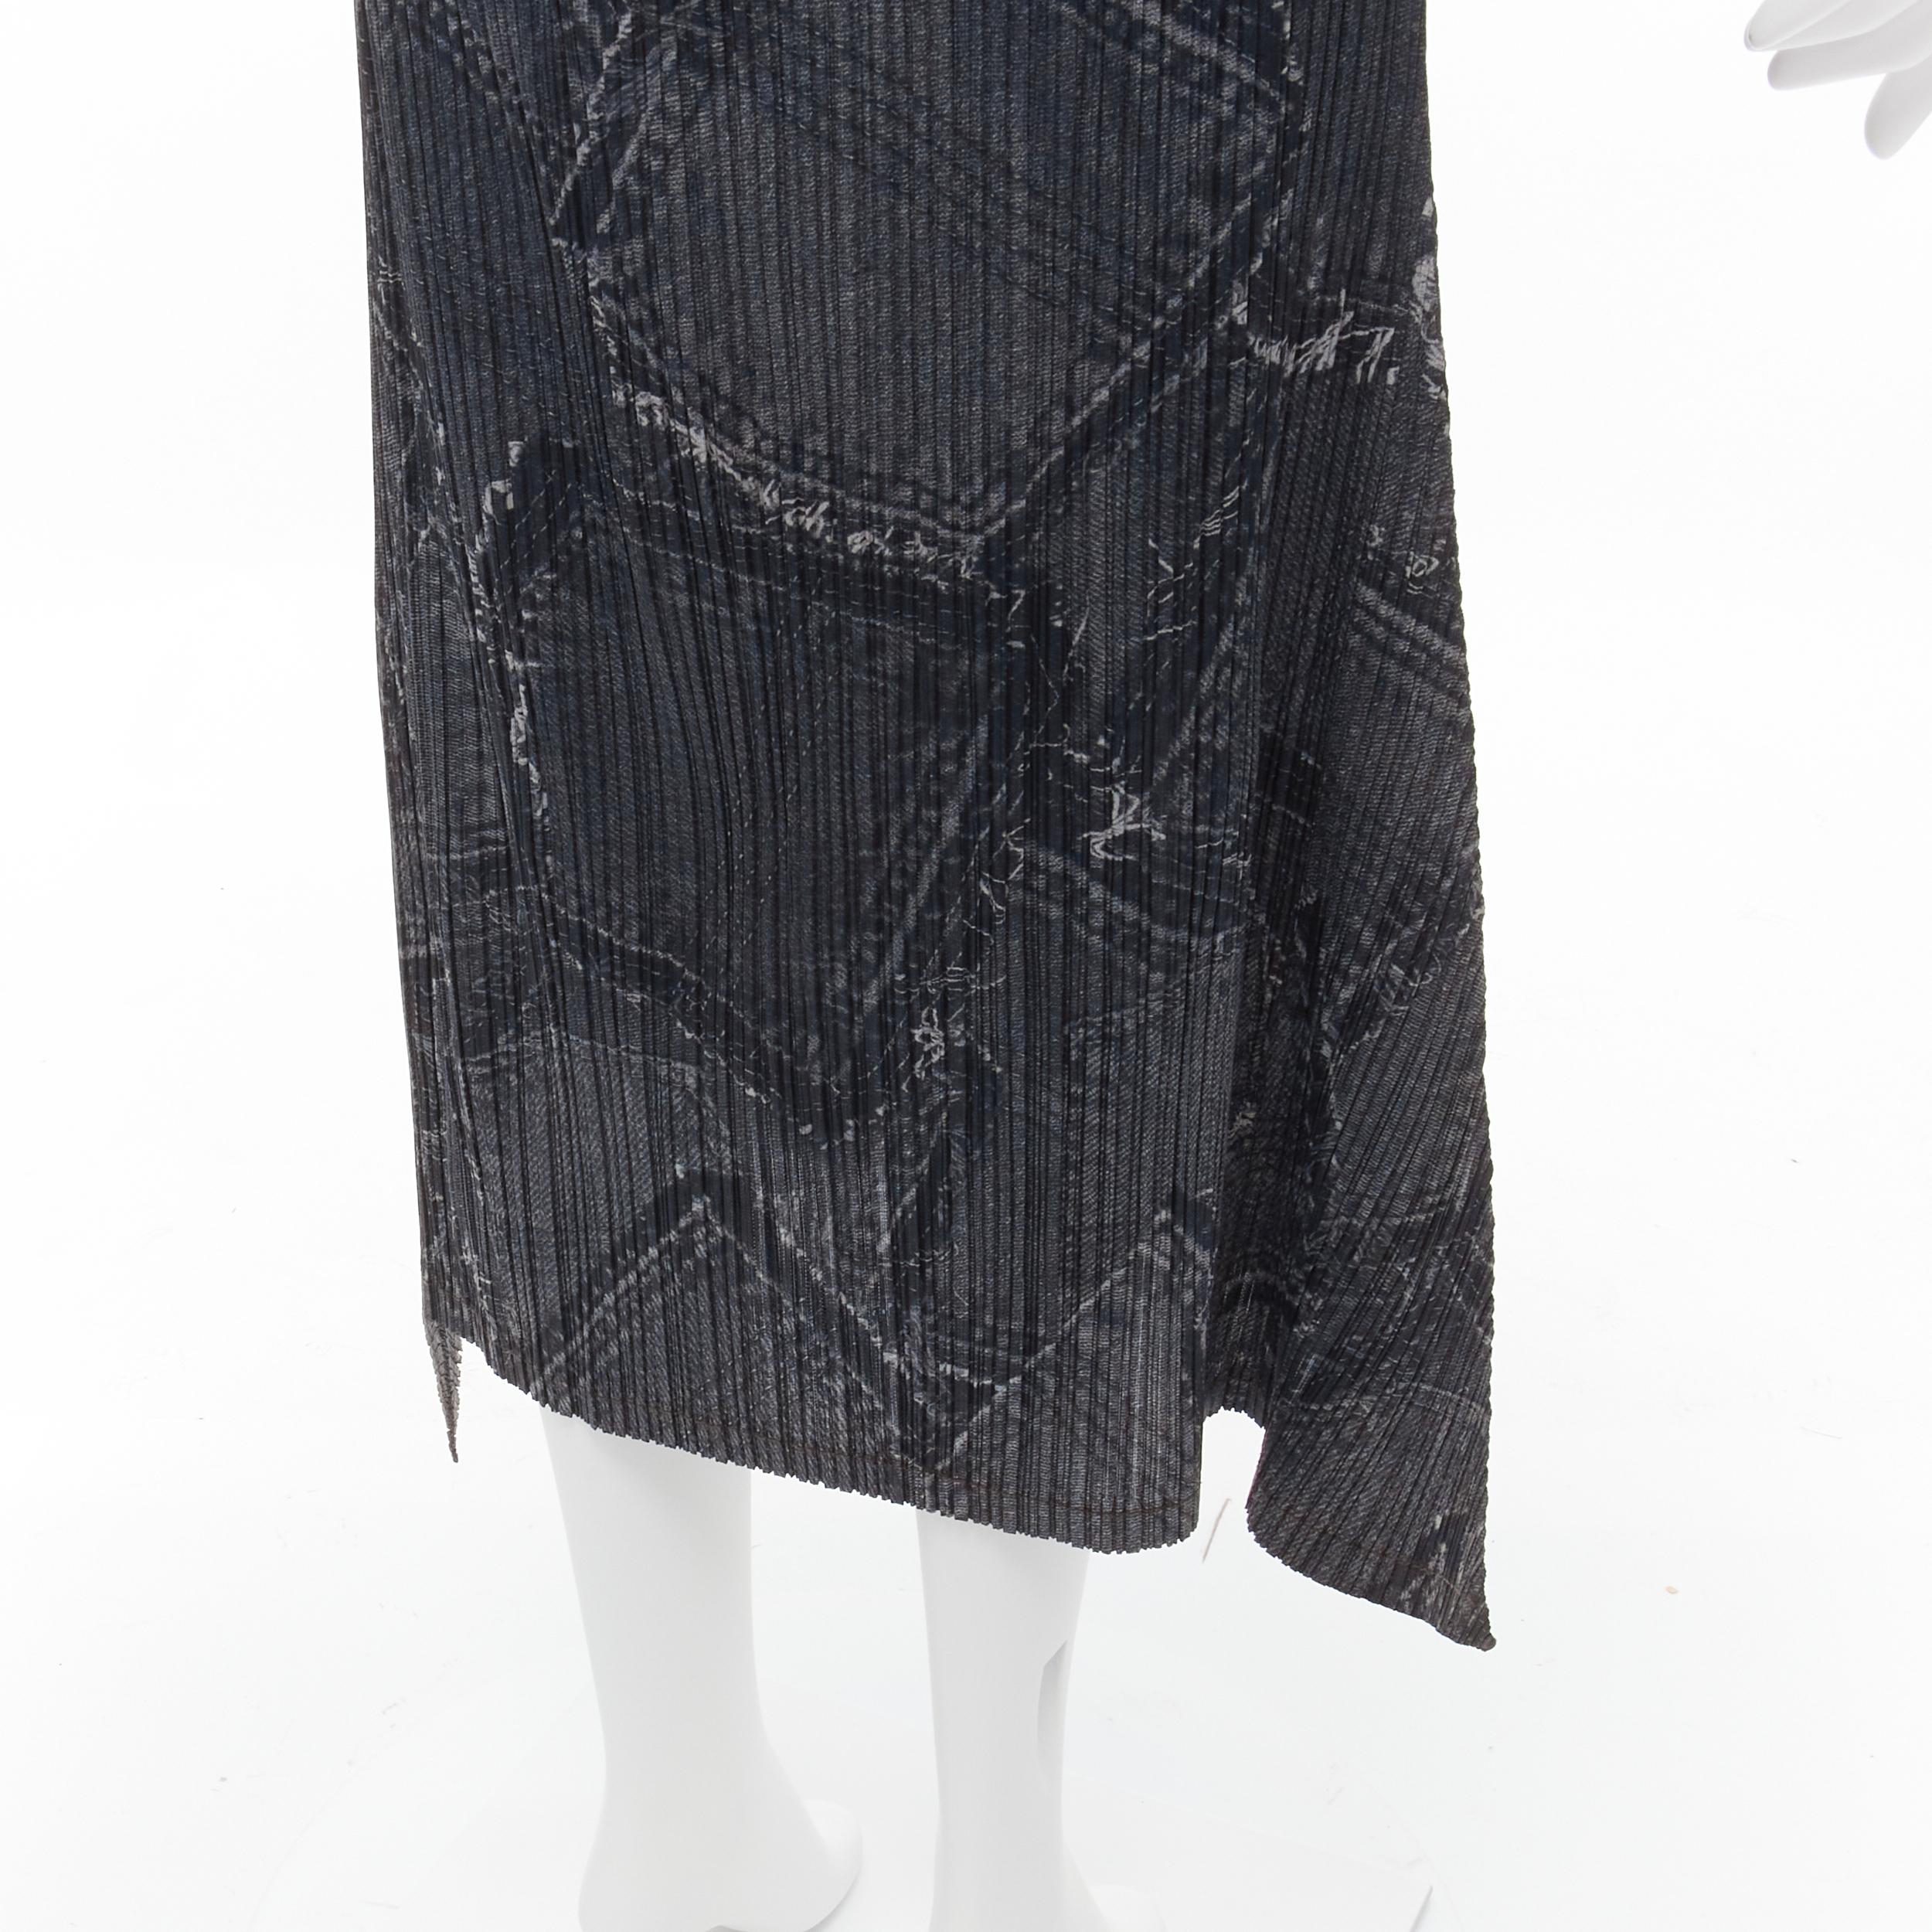 ISSEY MIYAKE PLEATS PLEASE dark blue denim patchwork print pleated skirt JP2 M
Reference: TGAS/C01966
Brand: Issey Miyake
Collection: Pleats Please
Material: Polyester
Color: Blue, Black
Pattern: Photographic Print
Closure: Elasticated
Extra